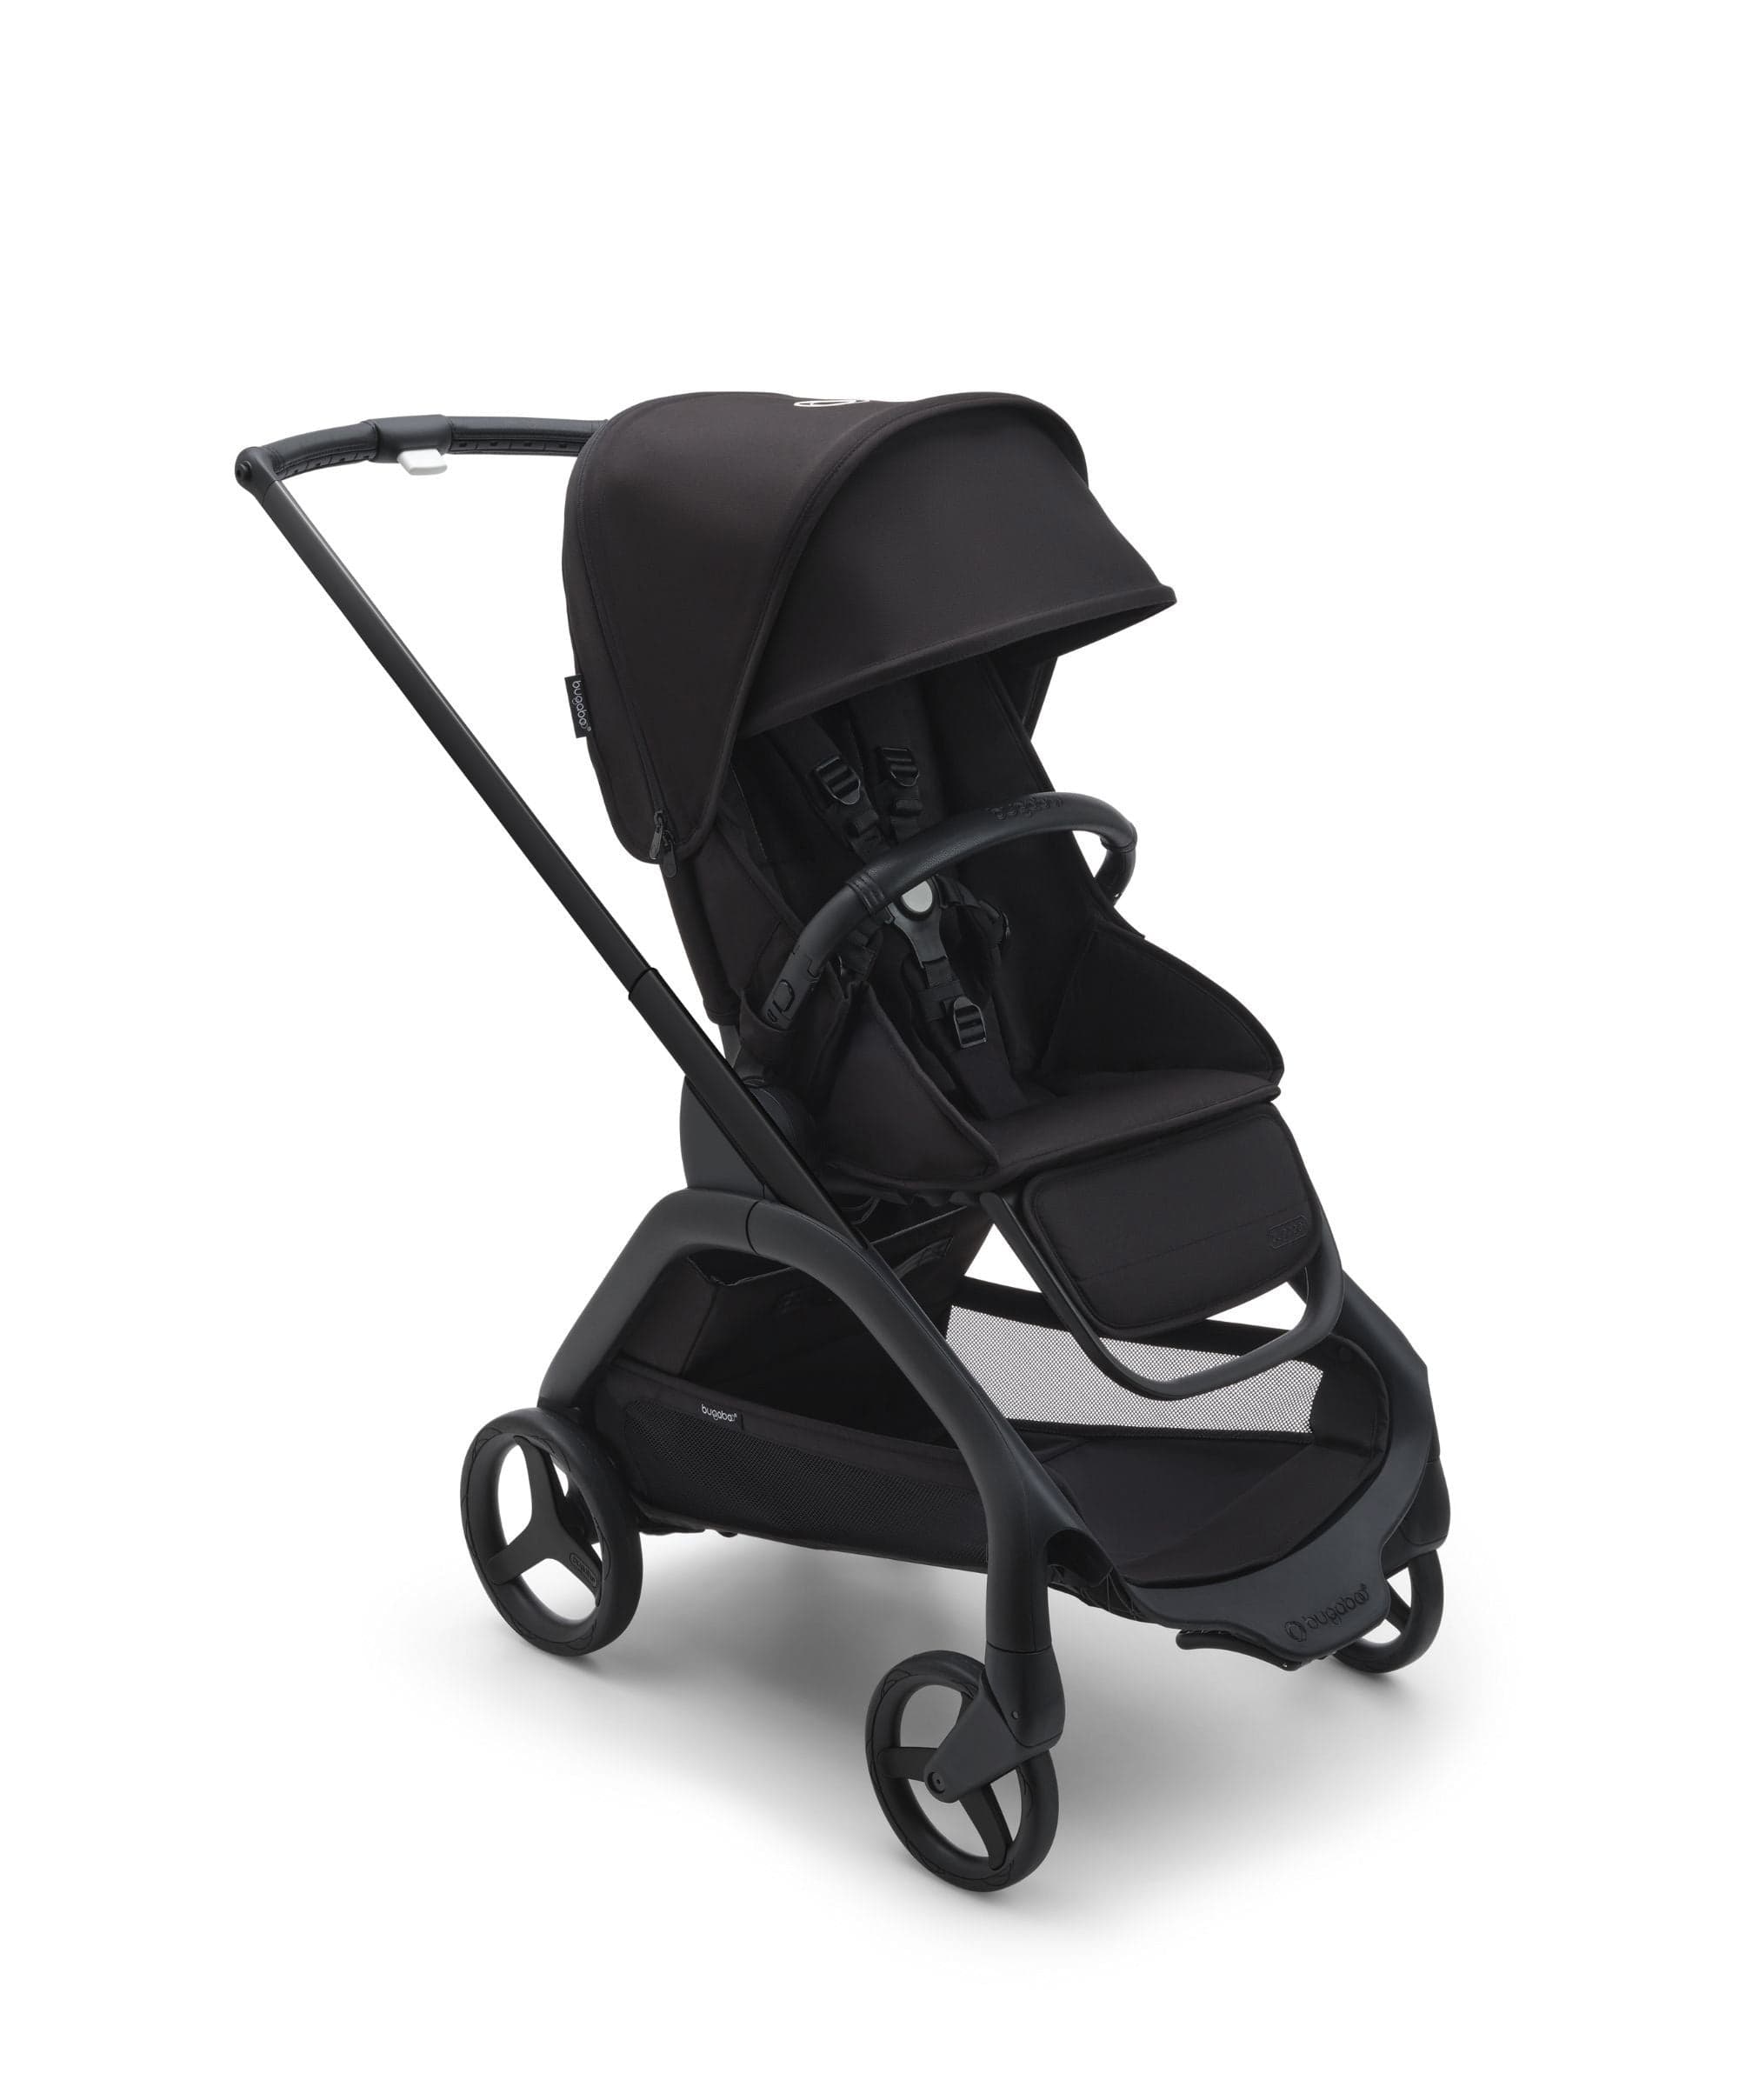 Bugaboo Dragonfly Complete Stroller in Midnight Black